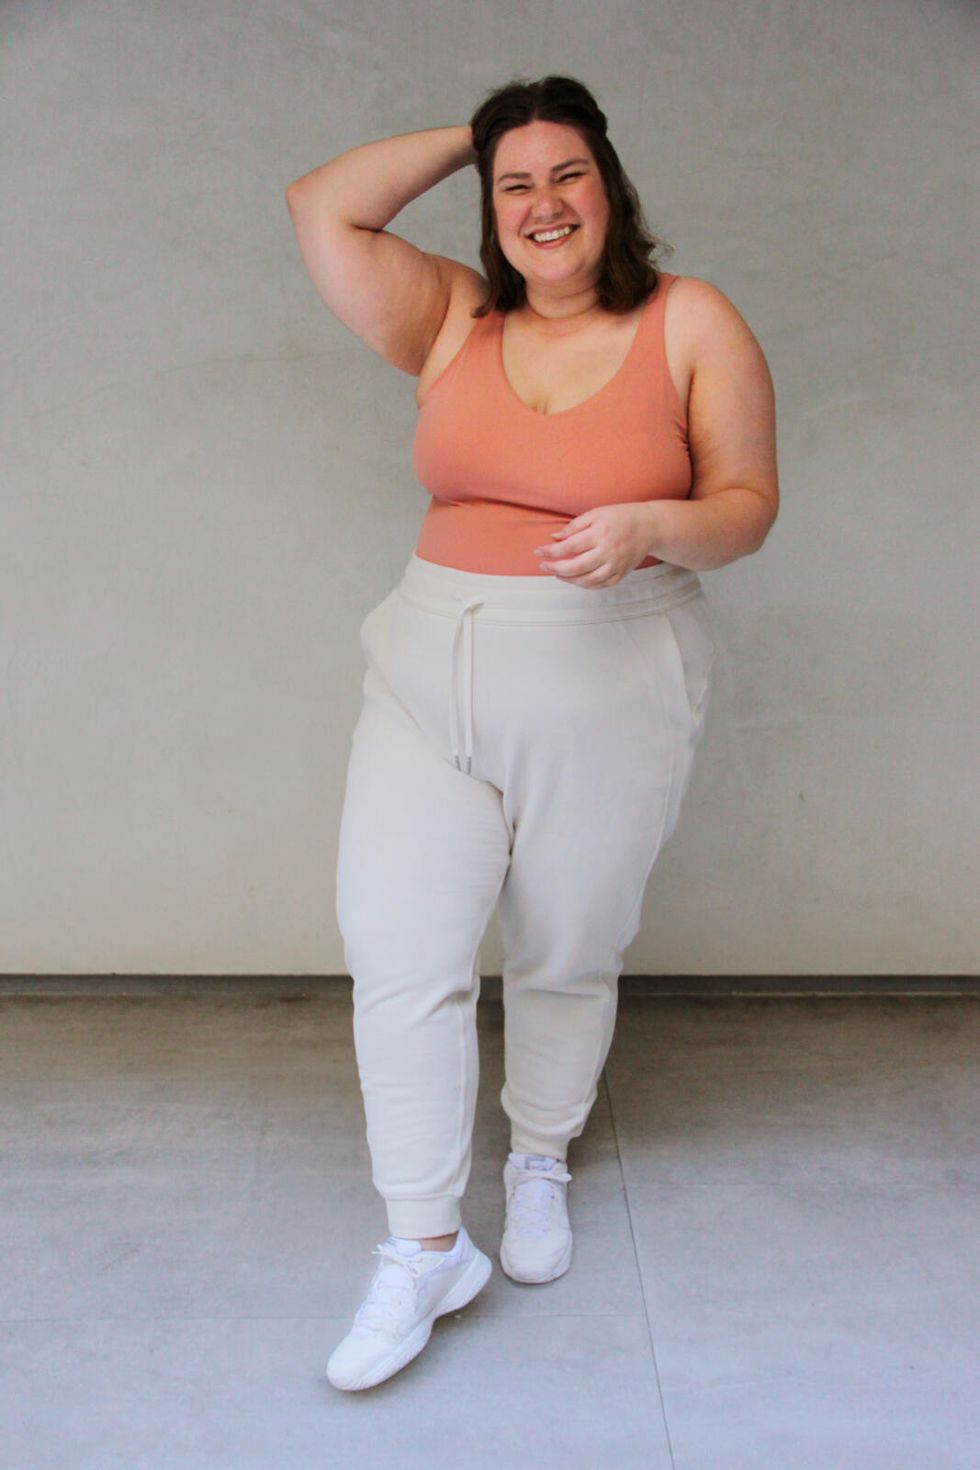 A Mini Review of American Eagle's Extended Sizing - The Wild Woman